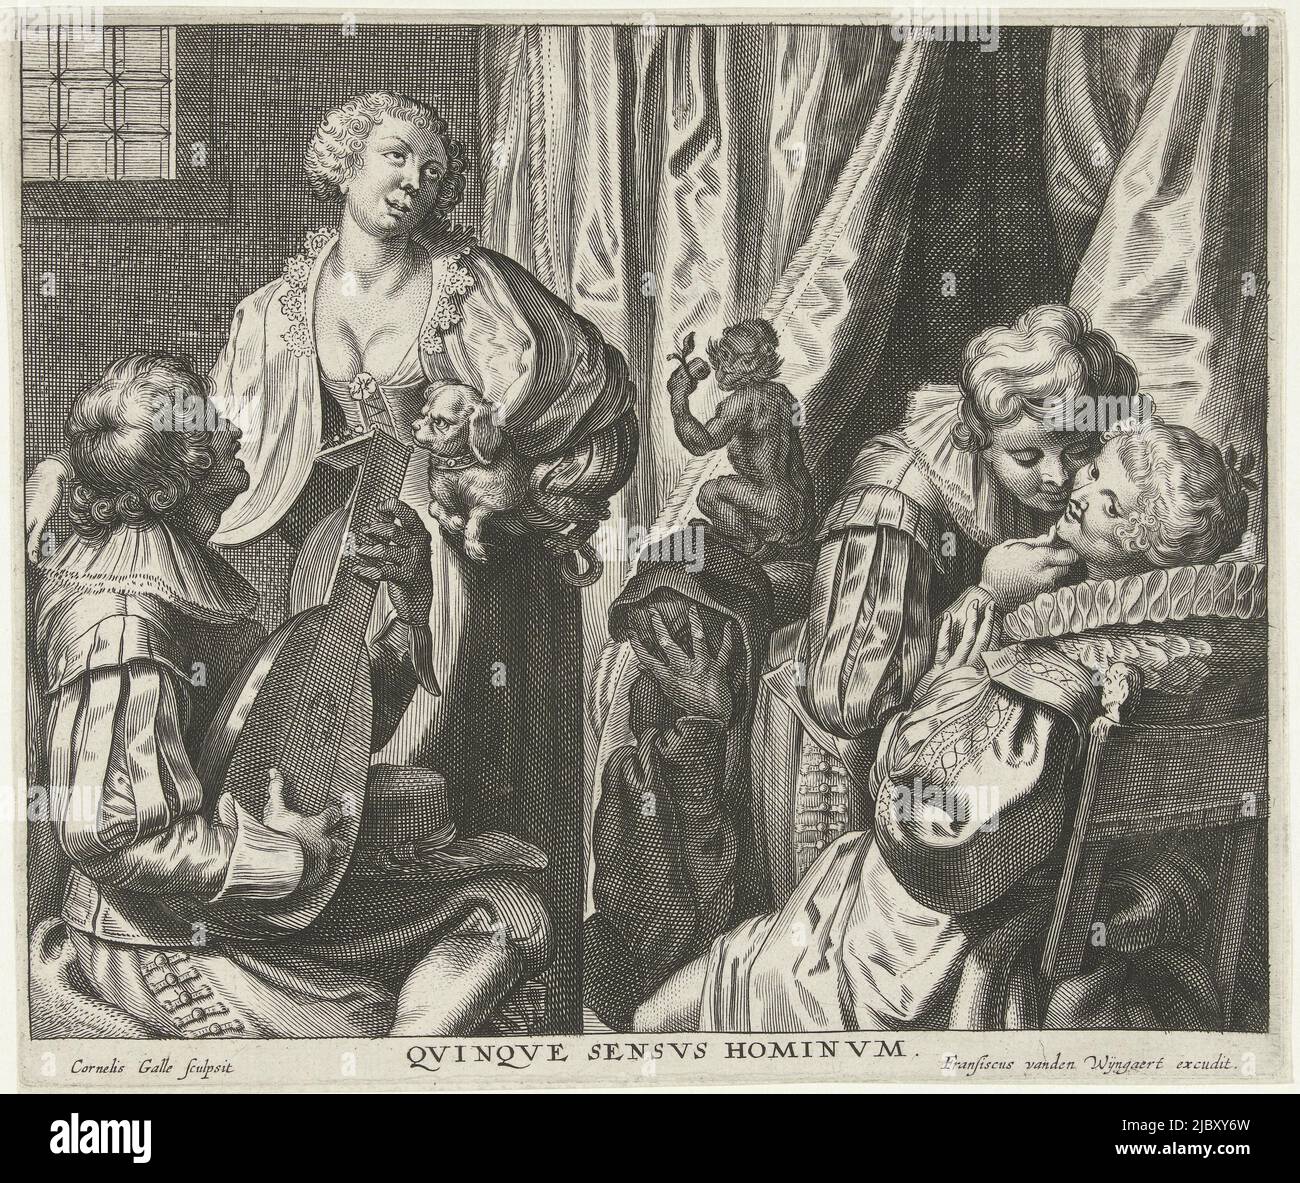 Allegorical representation of the five senses. A man plays a lute and a woman listens (hearing), a monkey eats a fruit (taste), a fool looks through his fingers (sight), a boy tries to kiss a girl (touch), he sniffs her scent (smell)., The five senses Qvinqve sensvs hominvm , print maker: Cornelis Galle (II), (mentioned on object), print maker: Cornelis Galle (I), (mentioned on object), Johann Liss, print maker: Antwerp, print maker: Southern Netherlands, publisher: Antwerp, c. 1610 - c. 1678, paper, engraving, h 172 mm × w 205 mm Stock Photo